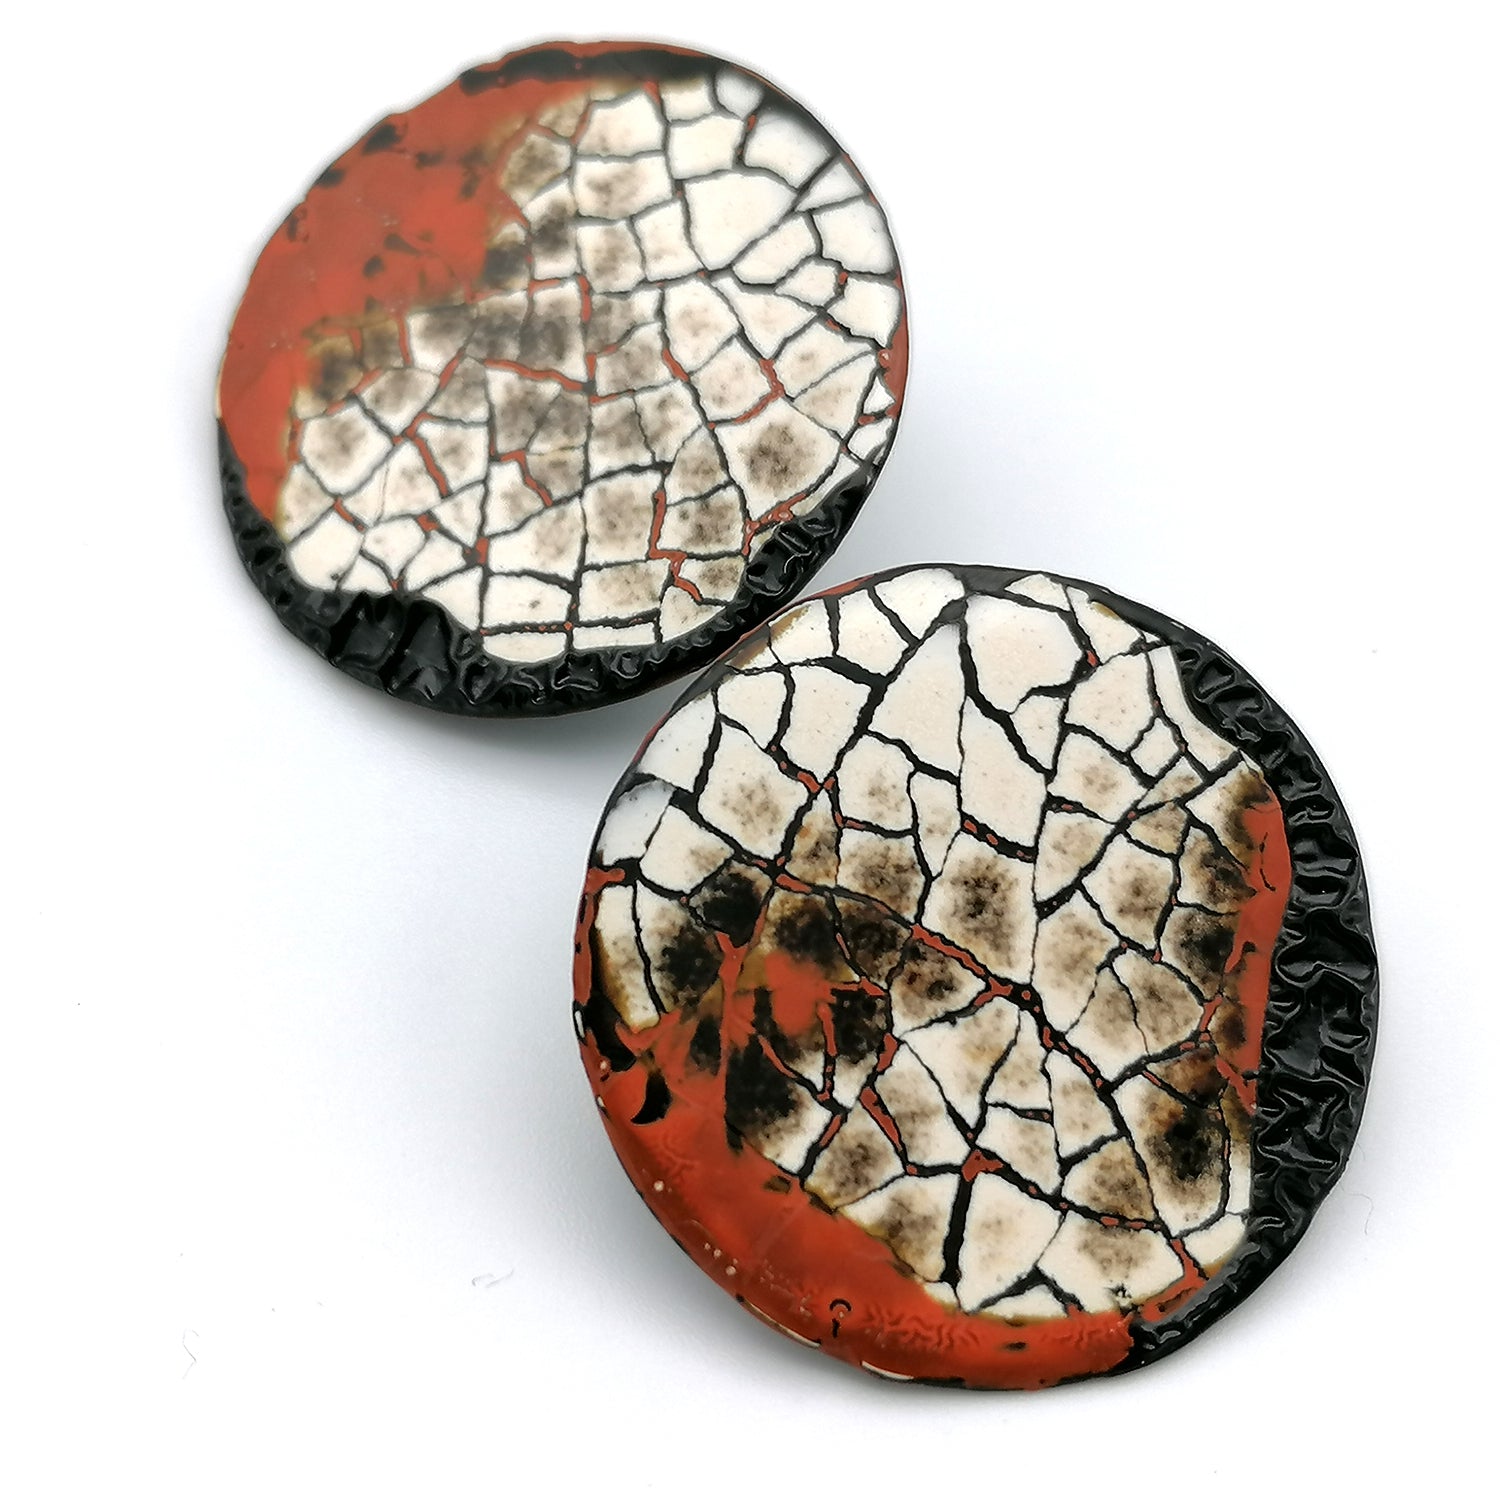 Images shows a pair of round stud earrings on a white background. Modern mosaic earrings made out of real eggshell and black lacquer with an area of raised black wrinkled texture and patches of red.